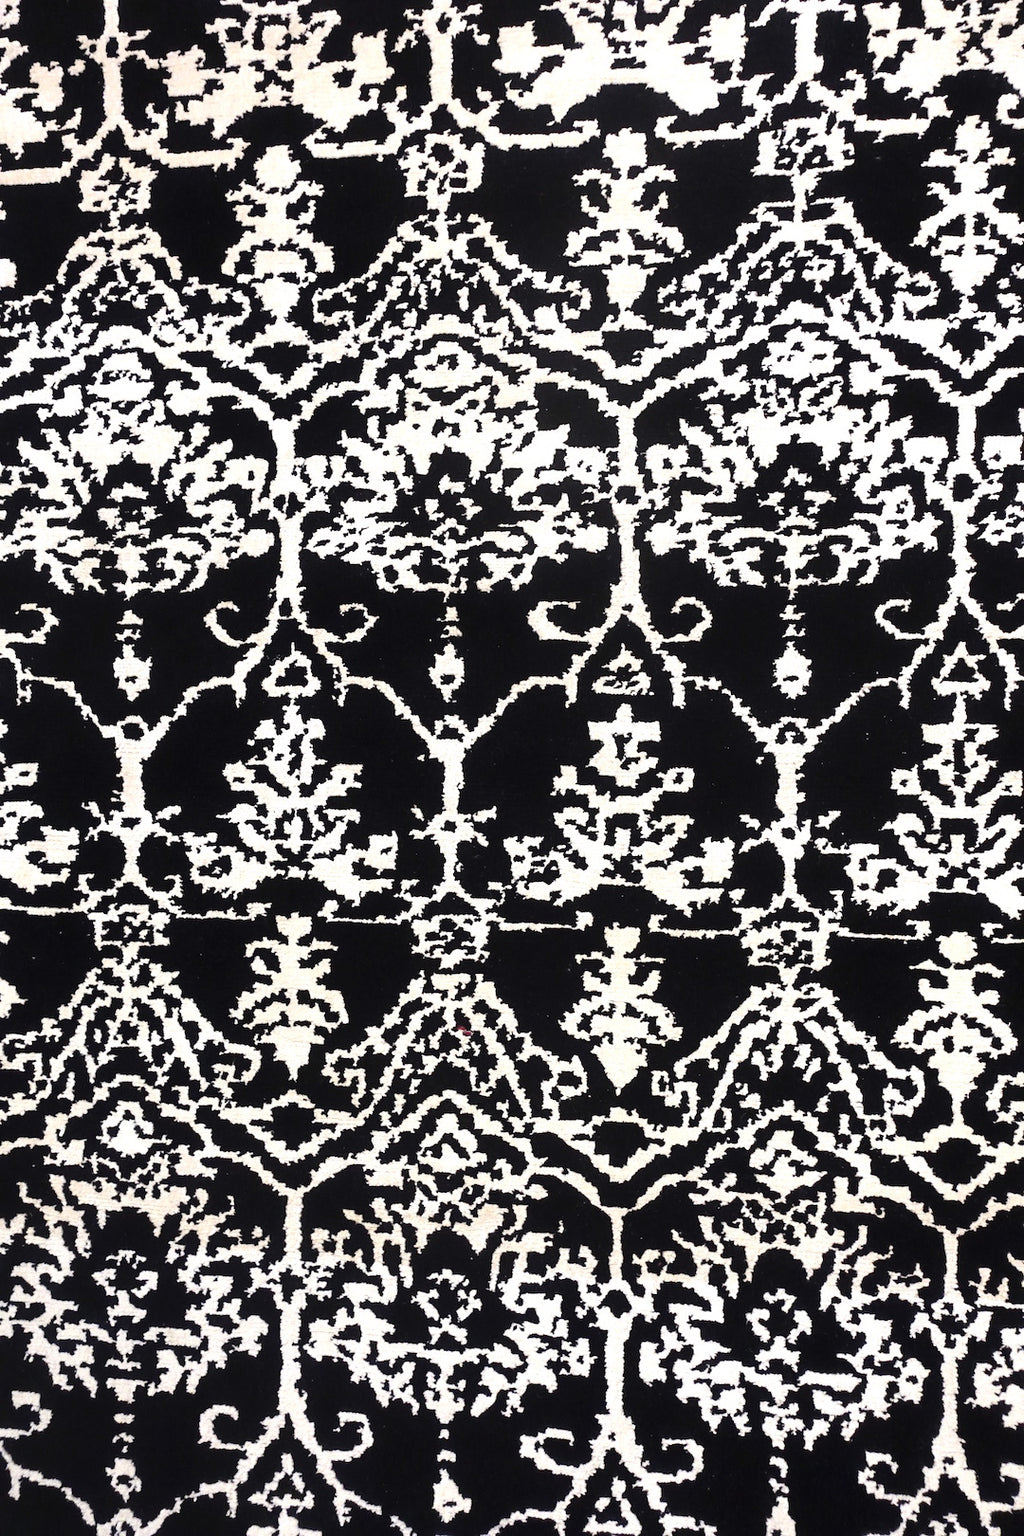 A 4 by 6 feet rug in black and white floral pattern.